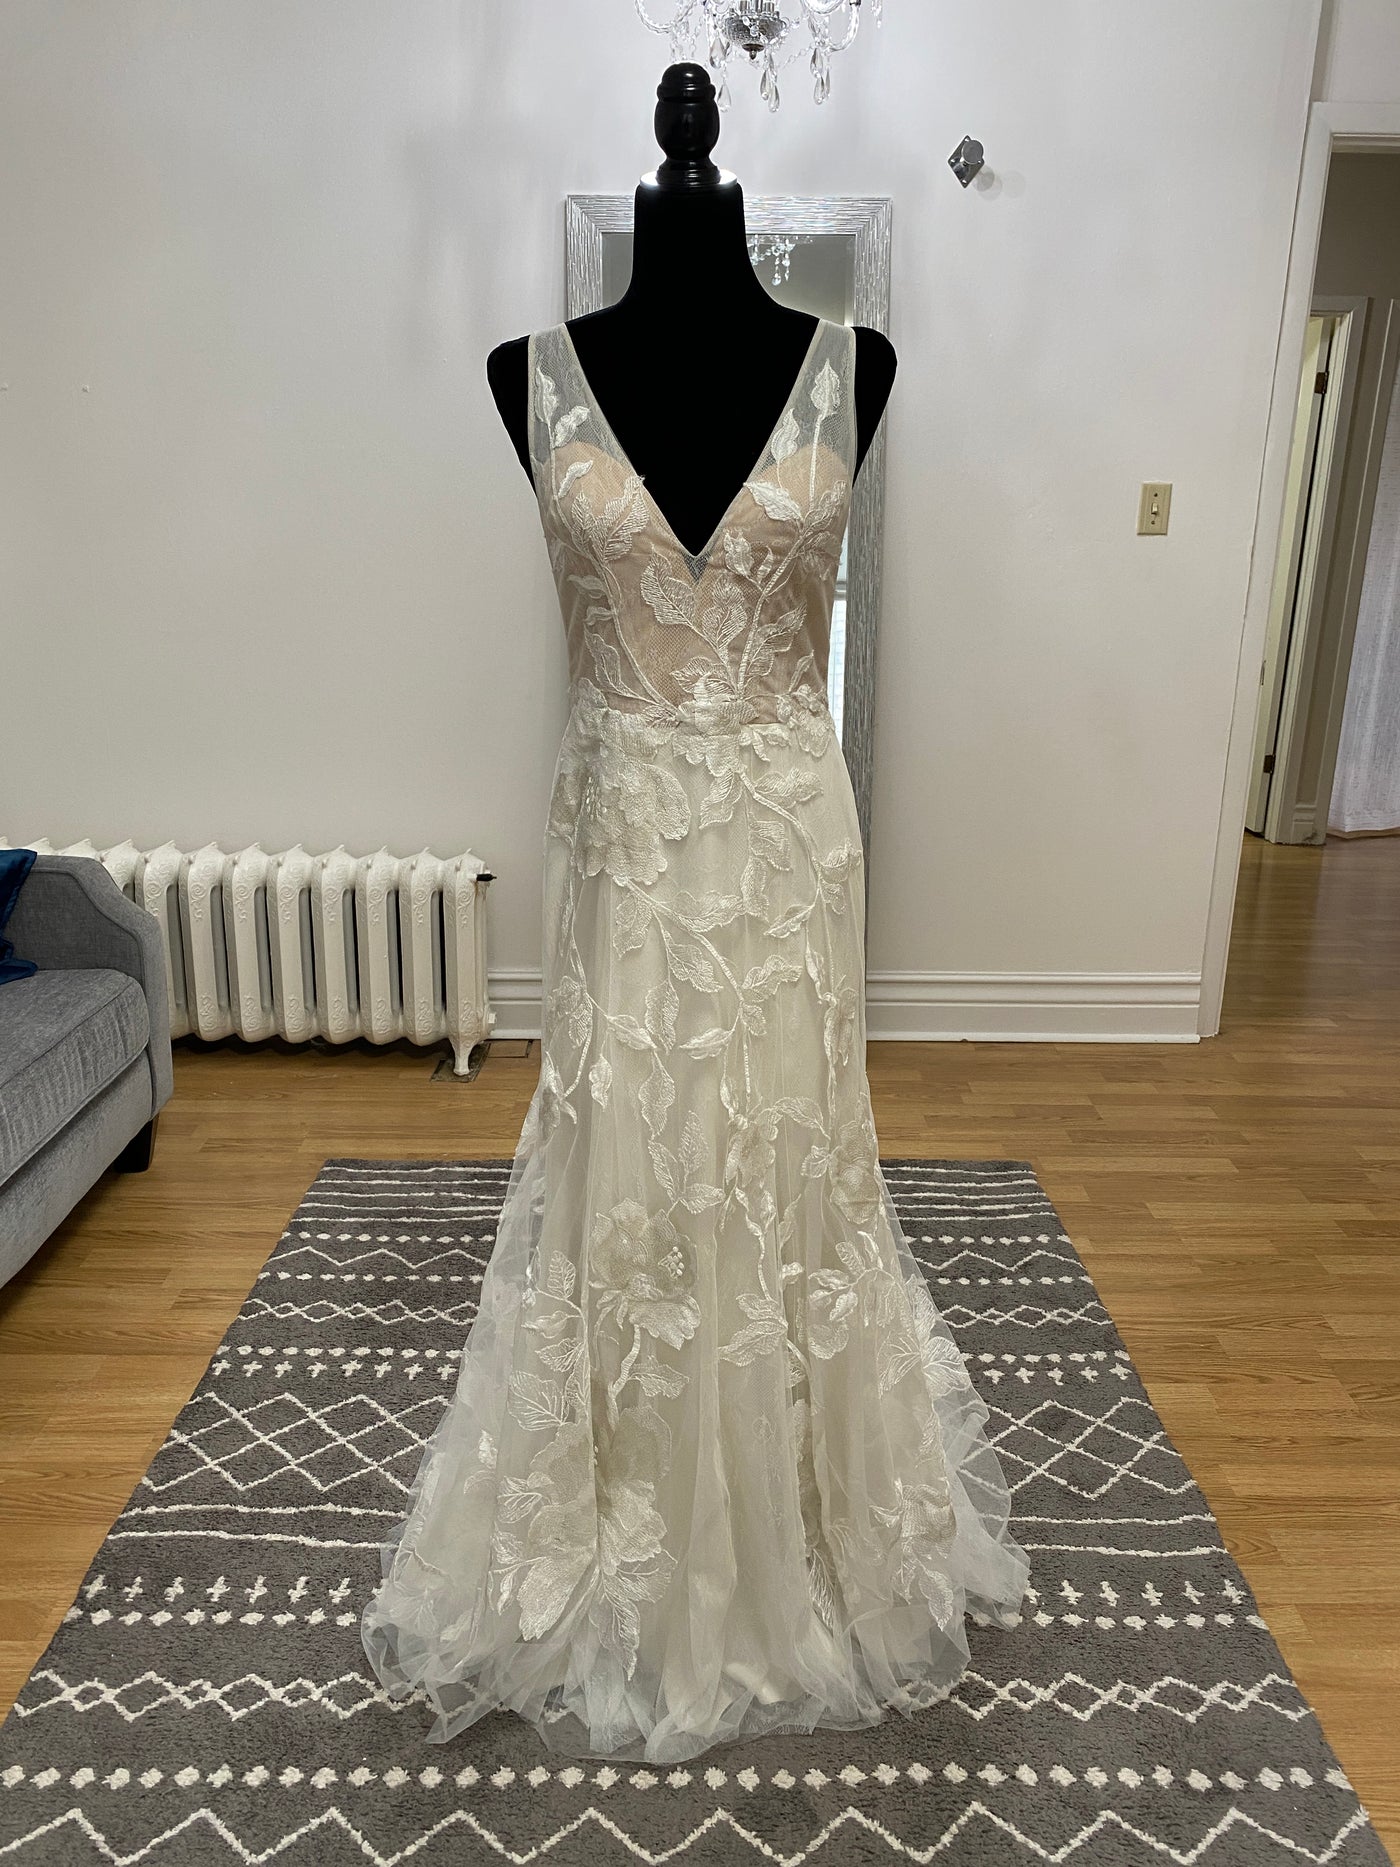 A Willowby by Watter Honor 52122 - Sample Size white floral lace wedding dress on a mannequin in a room with a geometric rug and light wooden flooring.